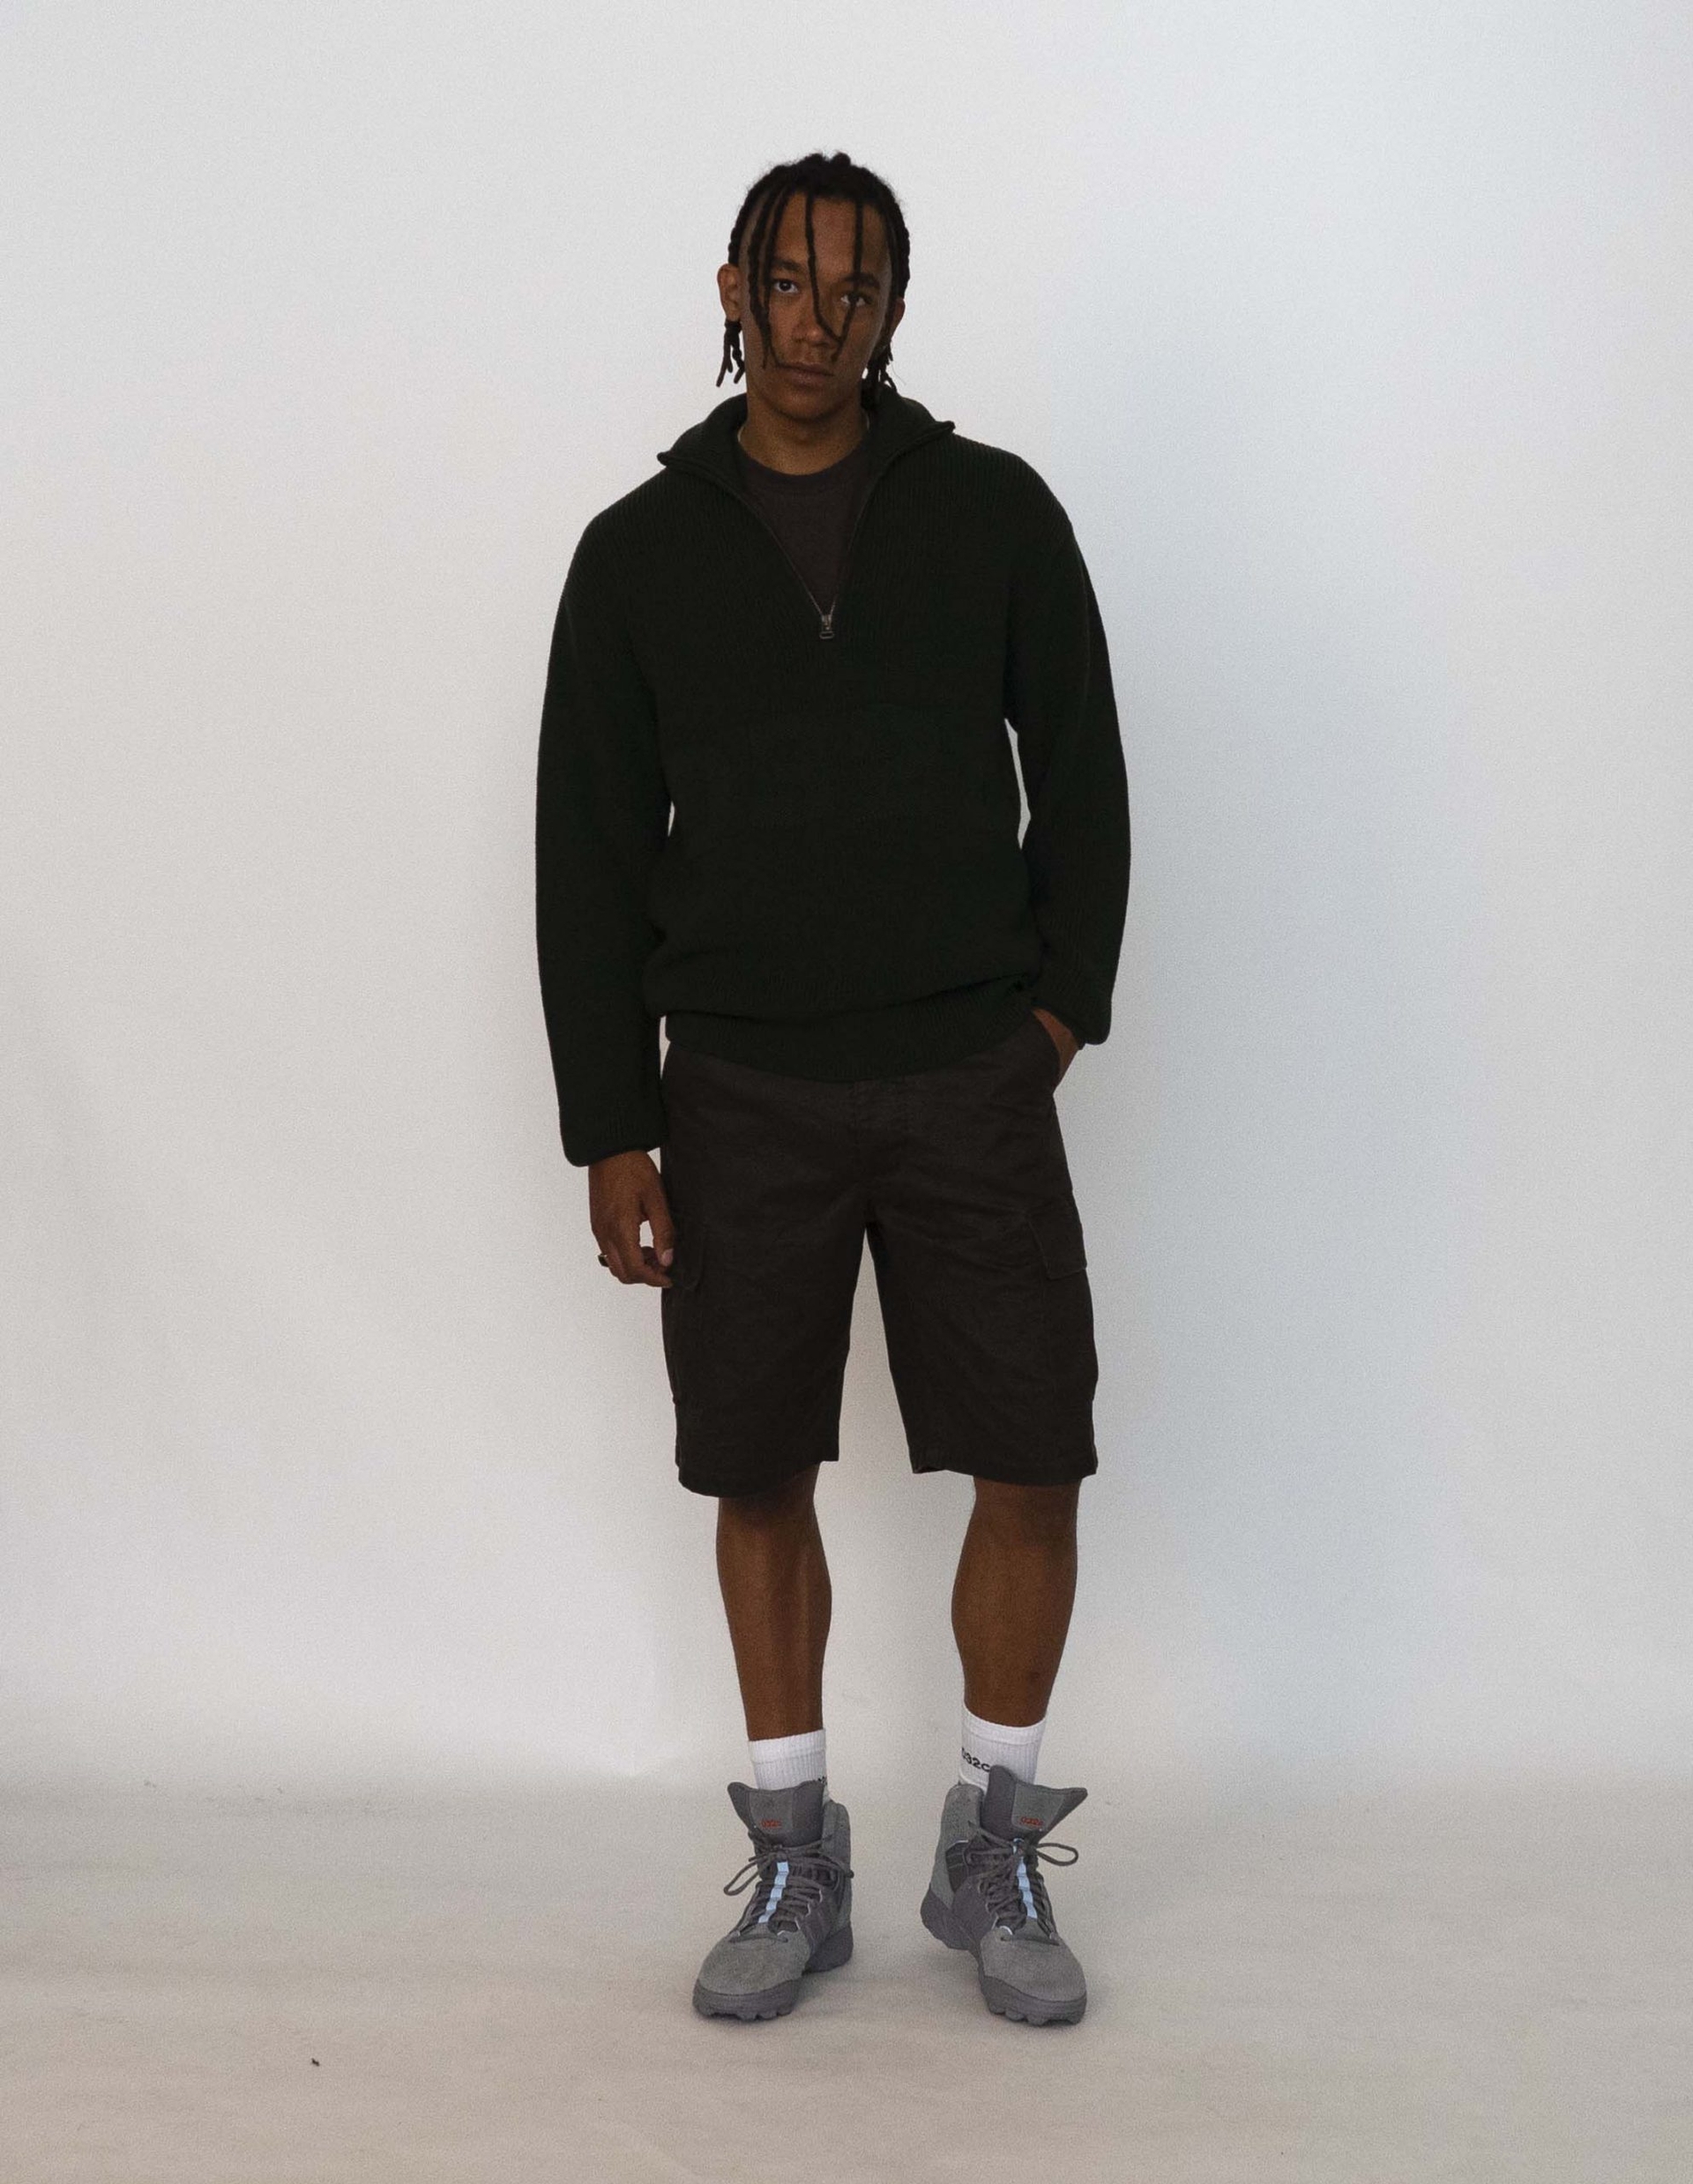 Buyegi wears the 032c LoveSexDreams Knit Troyer in olive and Cargo Shorts with the 032c x adidas Originals GSG-9High Top Sneaker